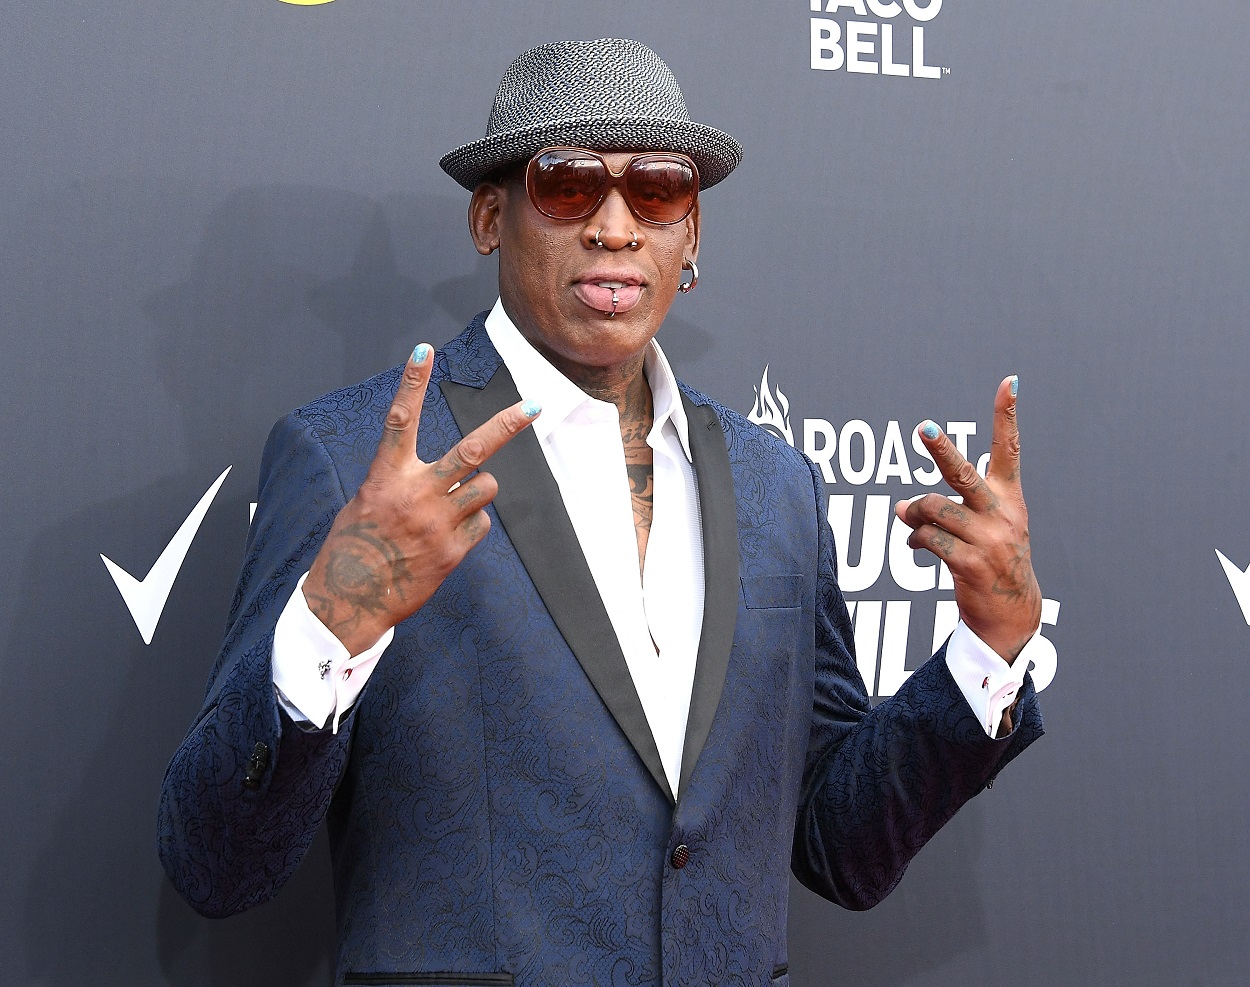 Dennis Rodman at the Comedy Central Roast of Bruce Willis in 2018